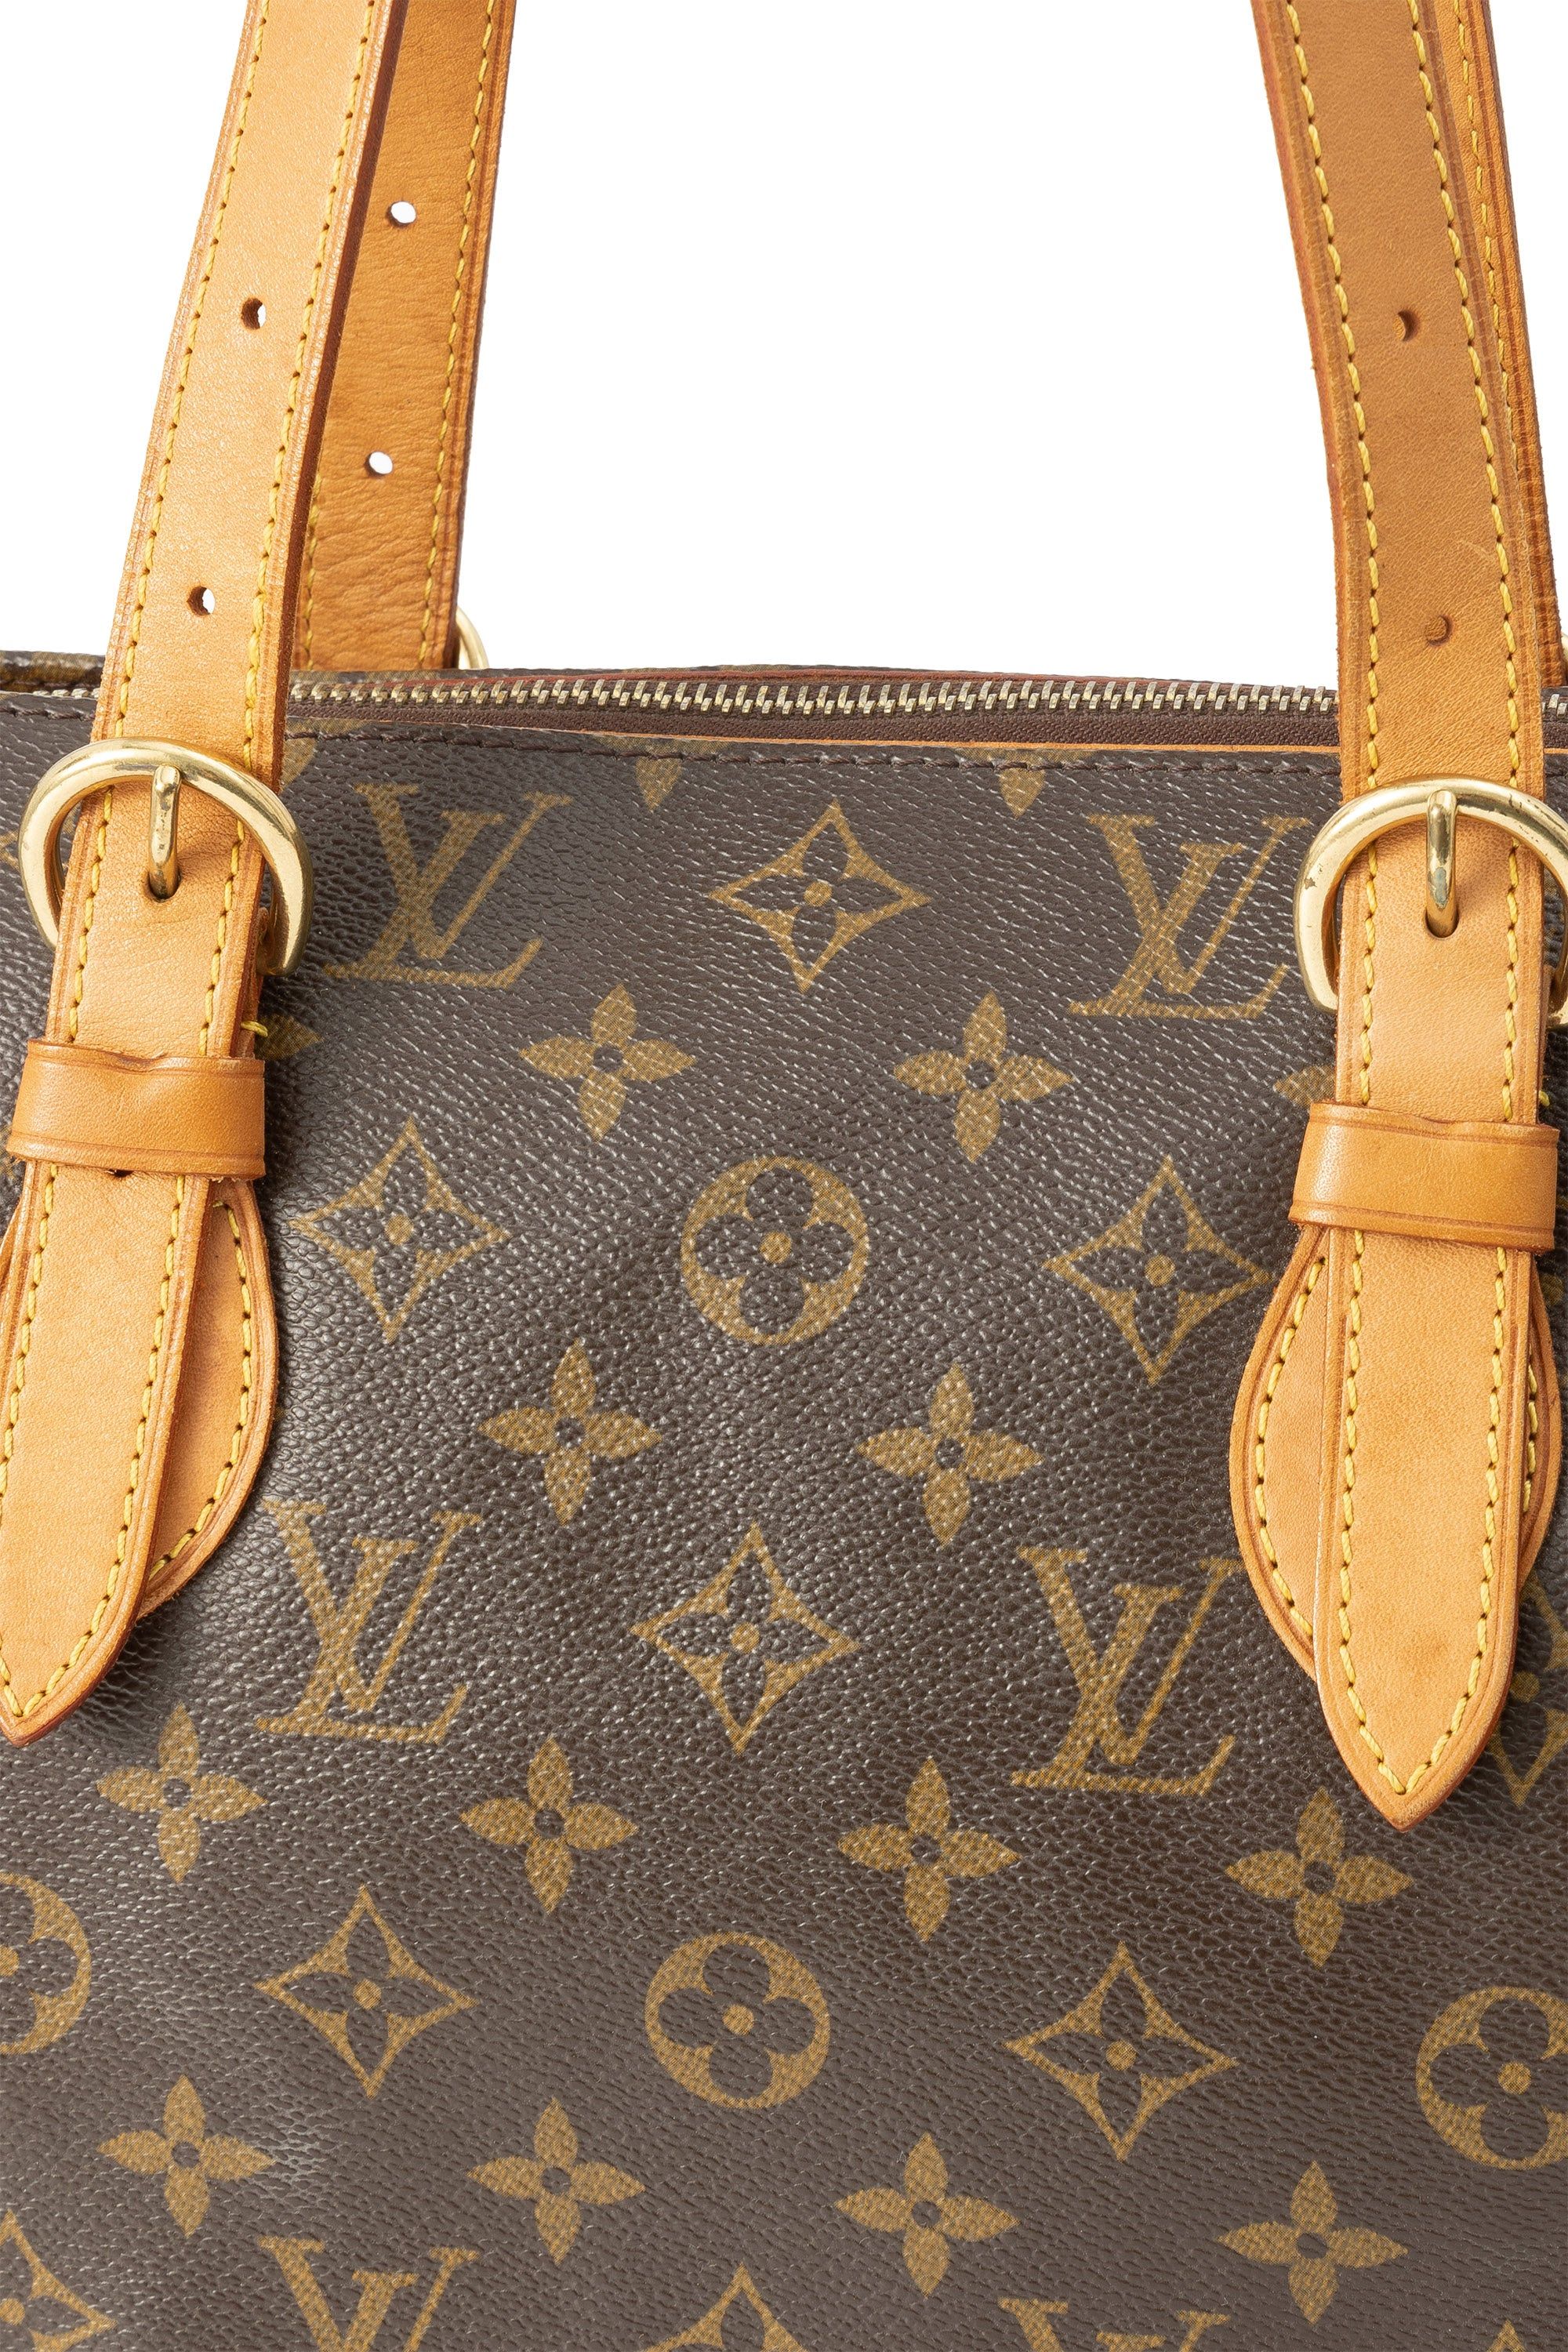 Louis Vuitton Tote Popincourt Monogram PM Marine in Coated Canvas/Leather  with Brass - US